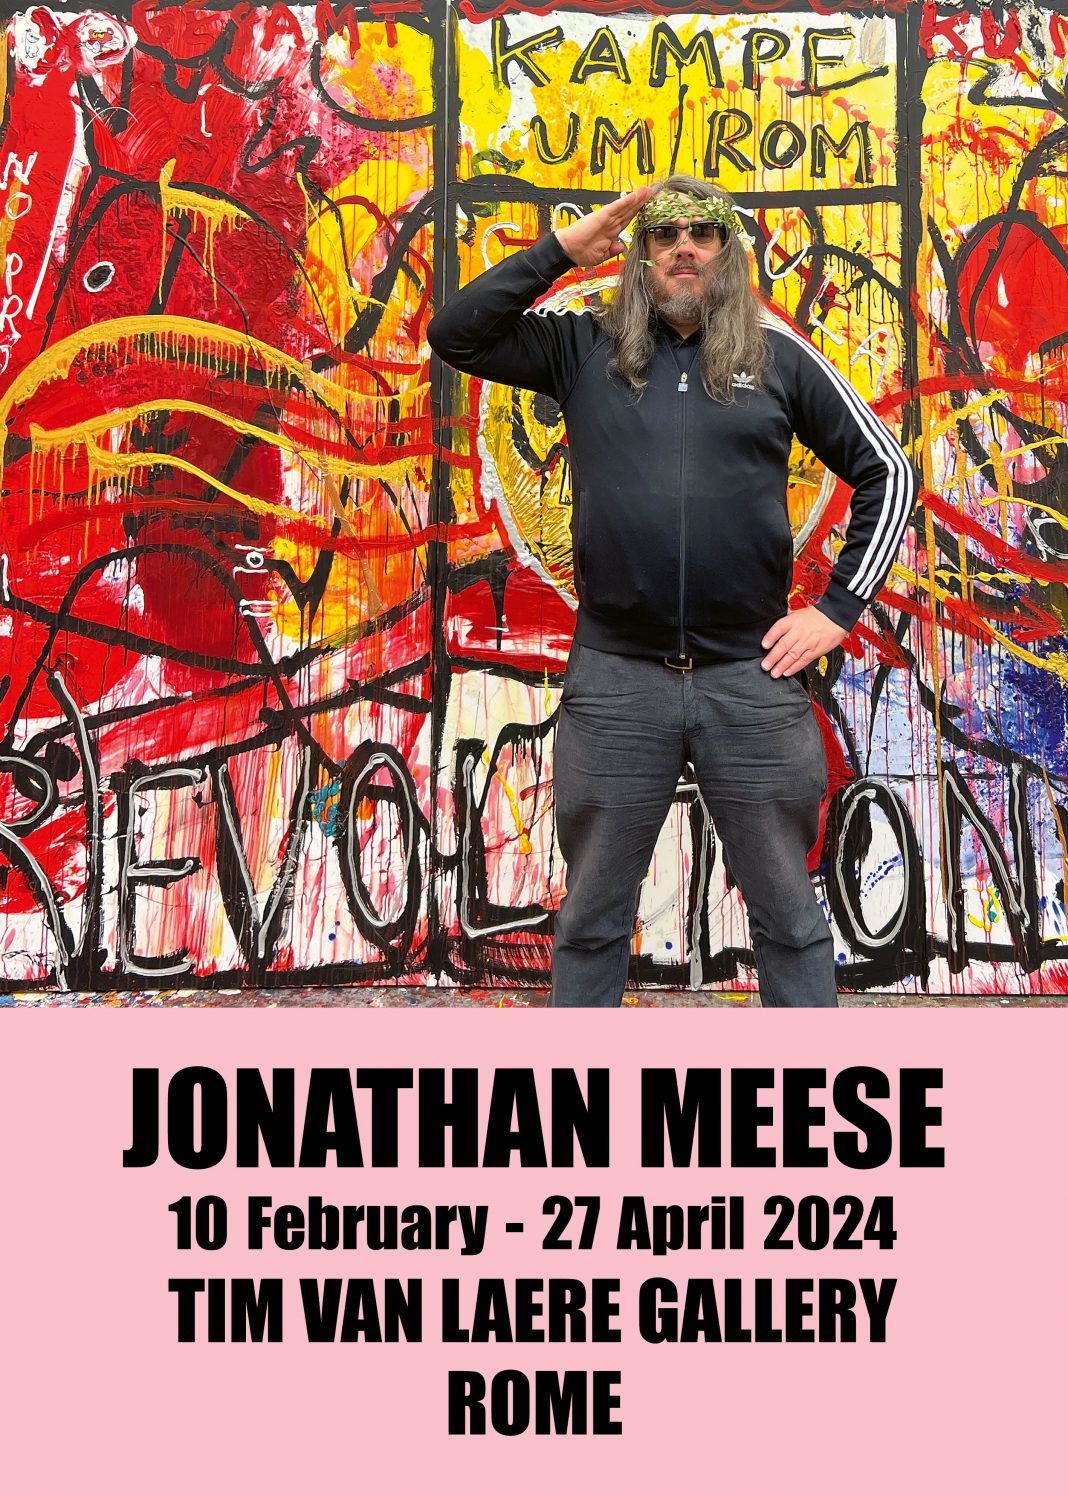 Jonathan Meese – A.R.T. IS TOTAL “FAMILY-BUSINESS”! AGRIPPINA=ARTMOTHERZ, NERO=ARTSOLDIER (CÄSAREN-ROULETTE, NO PROBLEM, YEAH)https://www.exibart.com/repository/media/formidable/11/img/1df/JM_POSTER_ROME_CMYK_Coated_Studiovisit-1068x1495.jpg